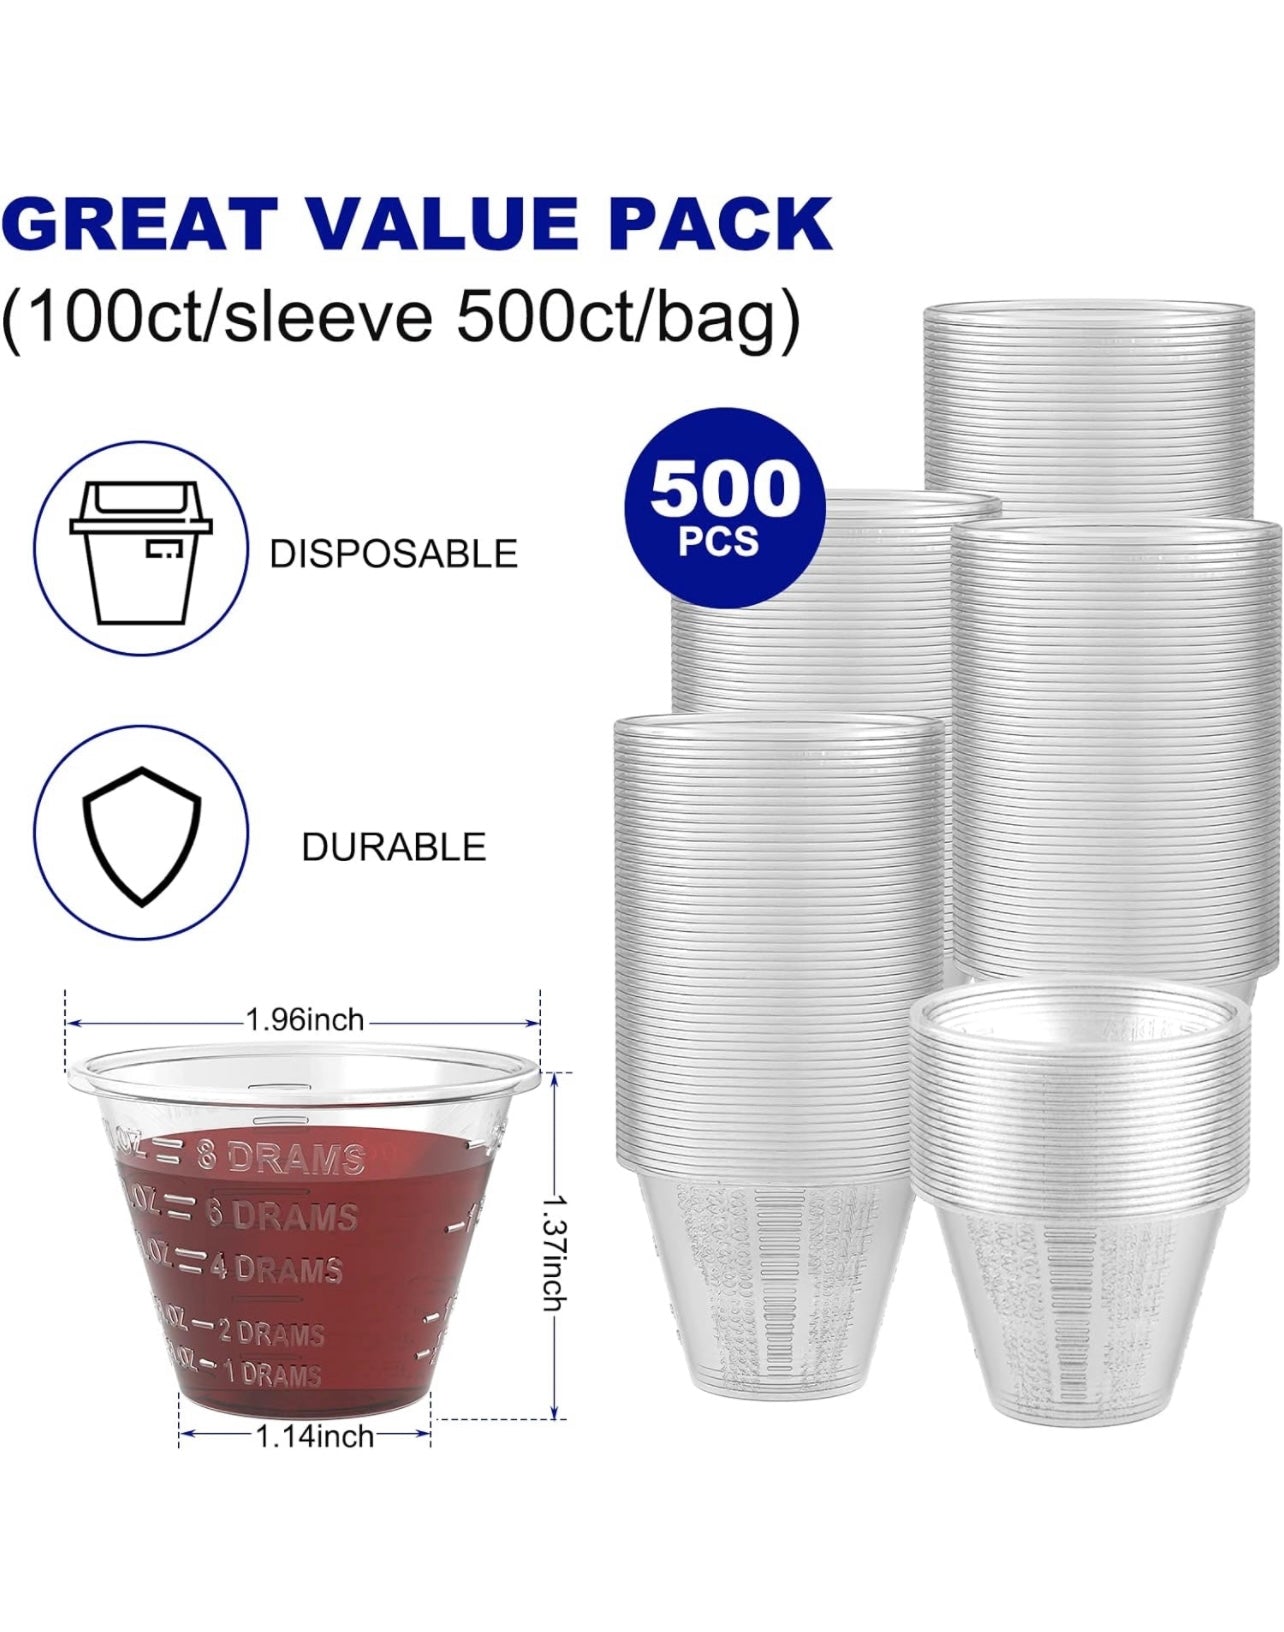 ReliMedPro Disposable Plastic Medicine Cups, Bulk Pack of 500, 1 OZ (30ml)